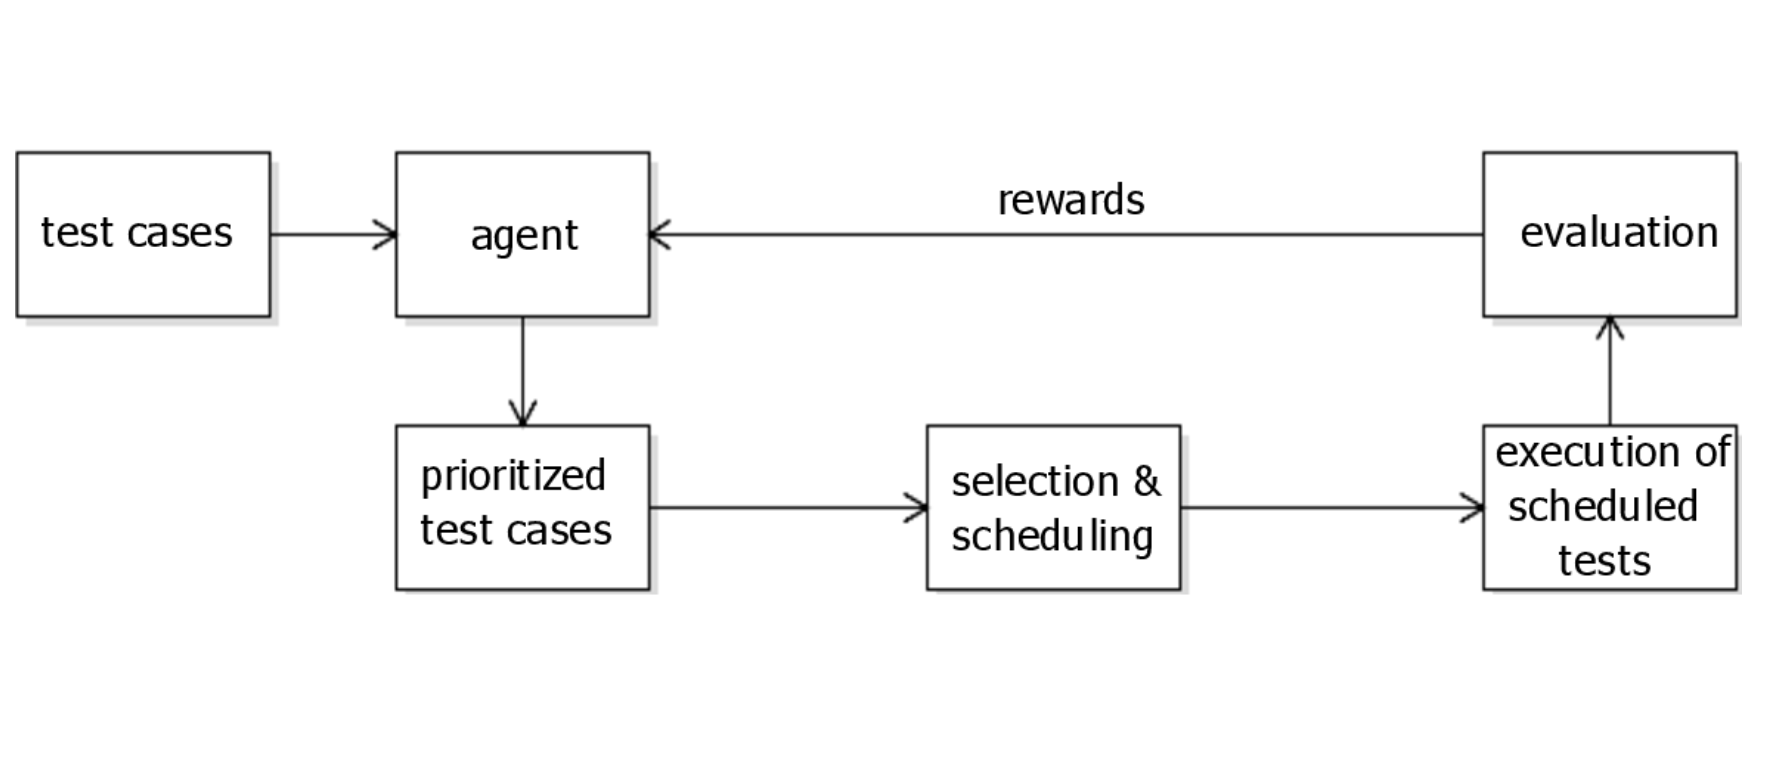 RL for automatic selection and prioritization